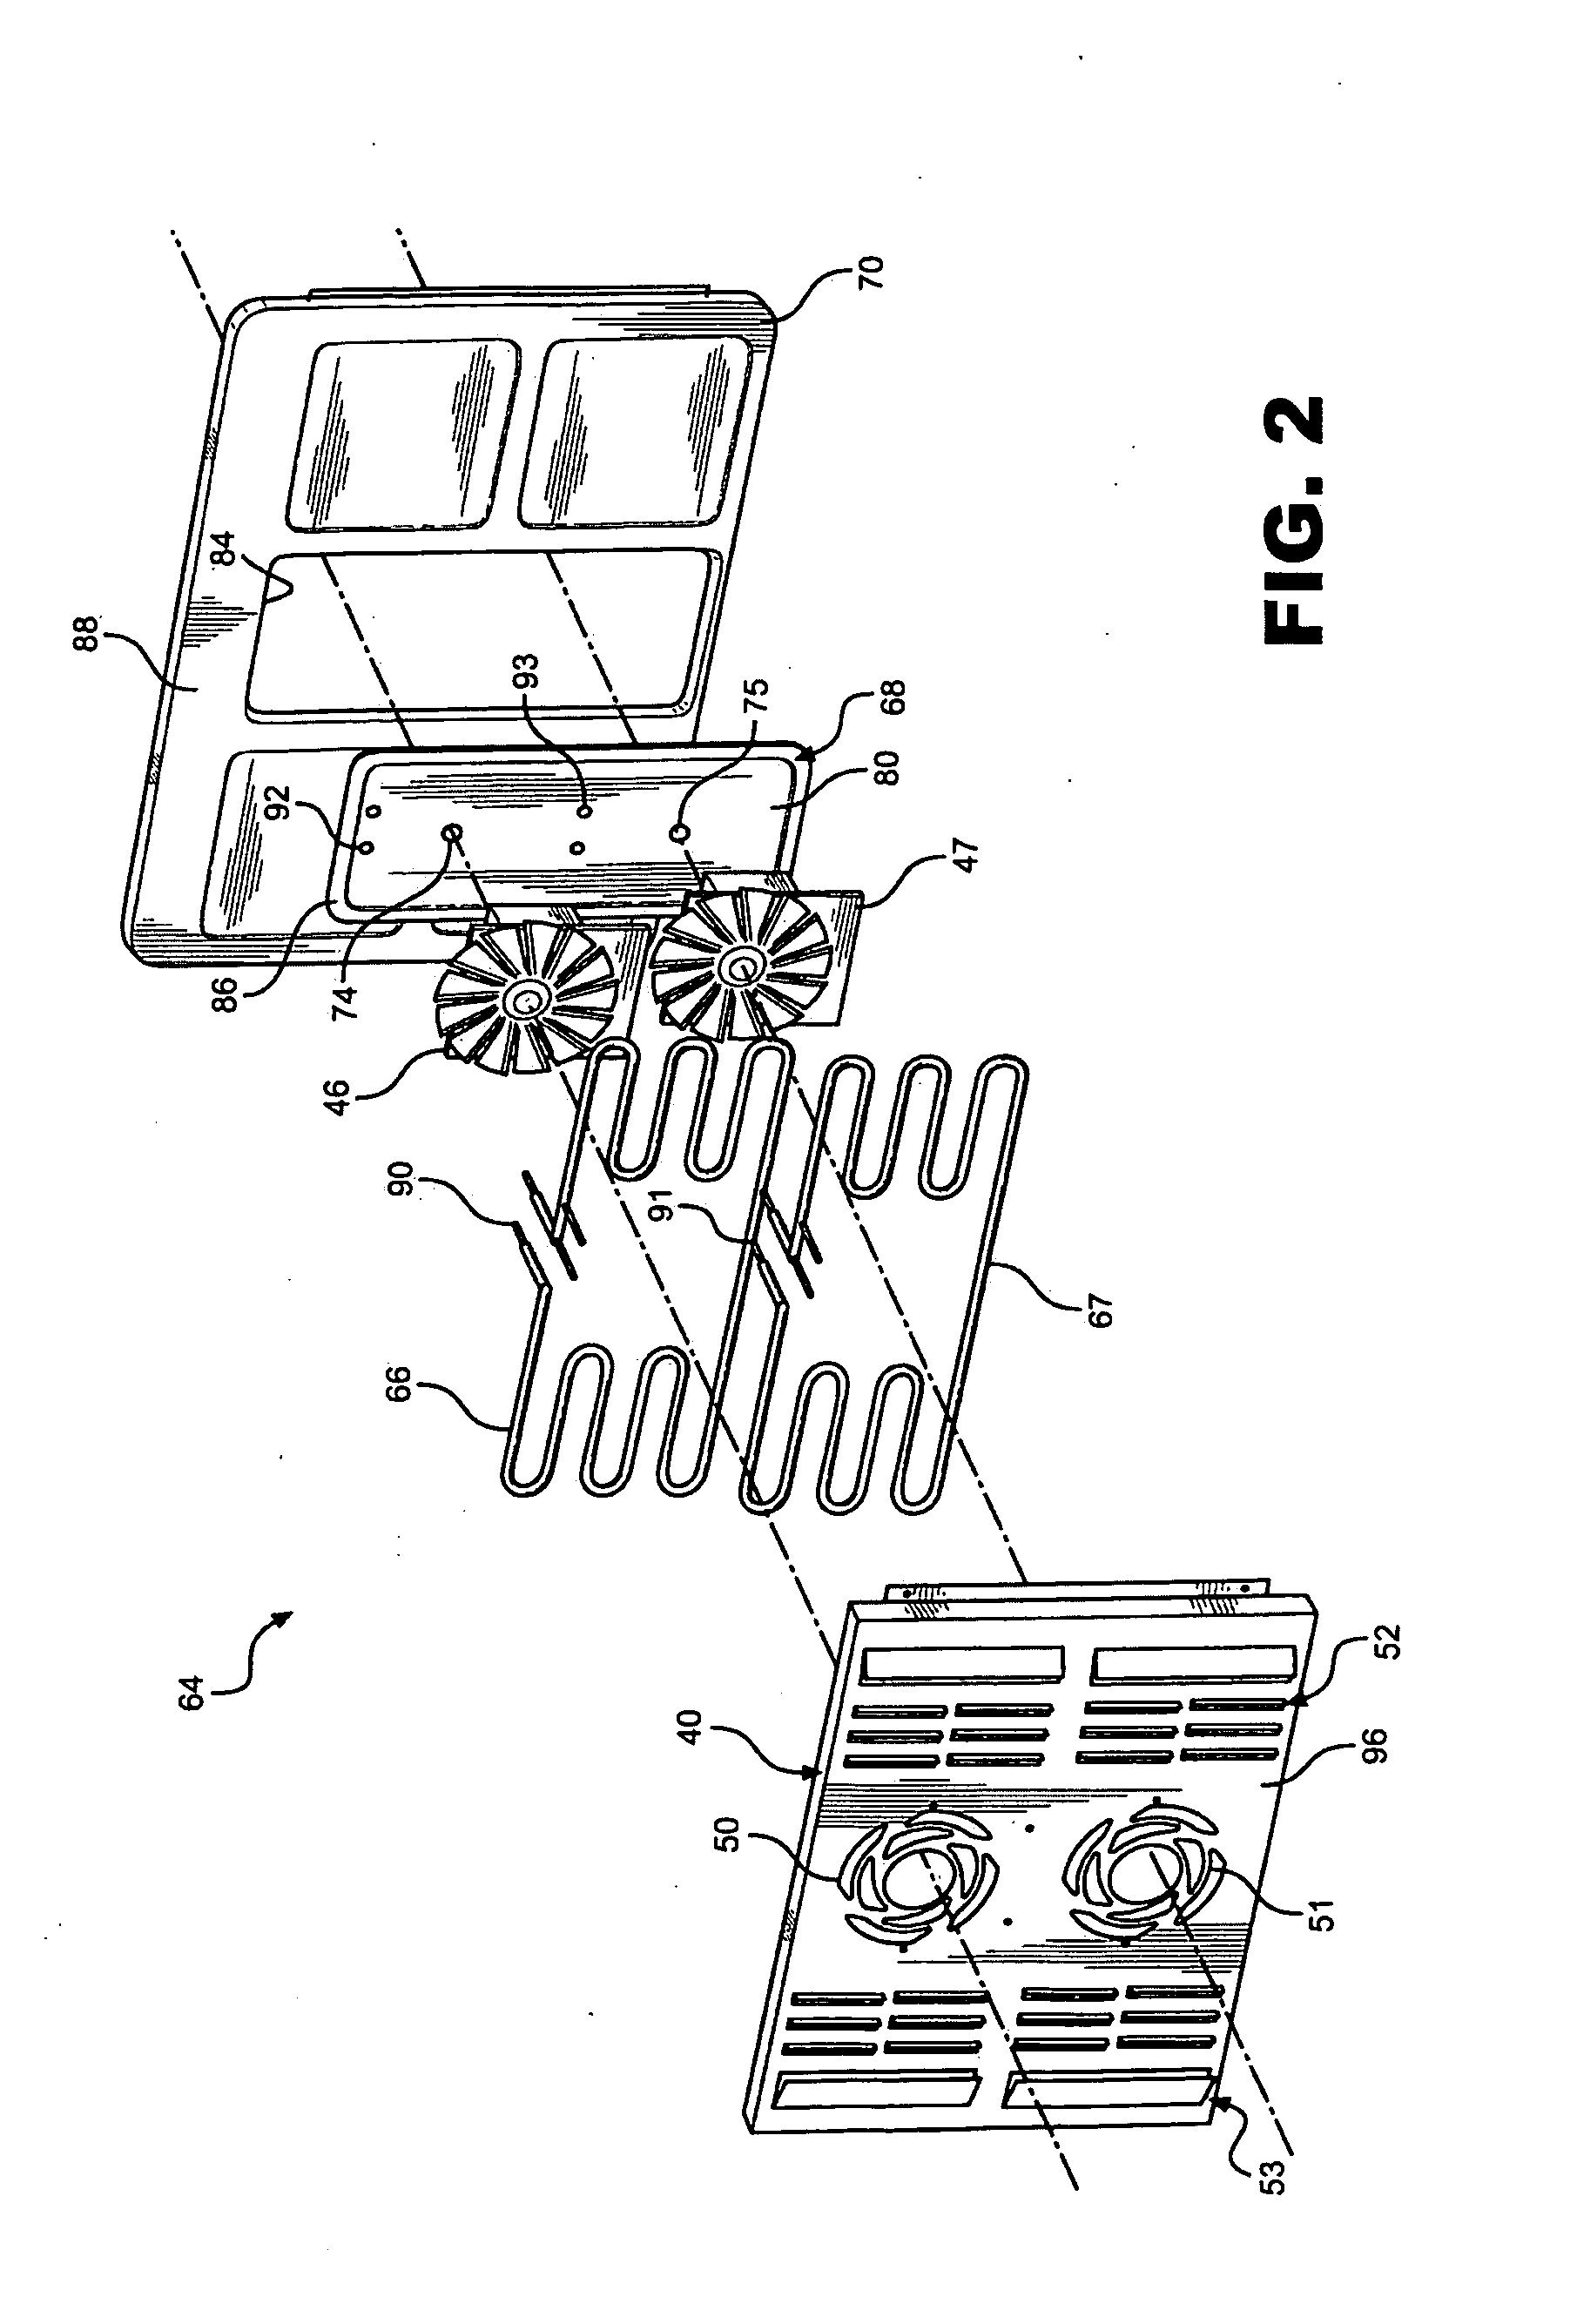 Convection cooking in multi-fan convection oven